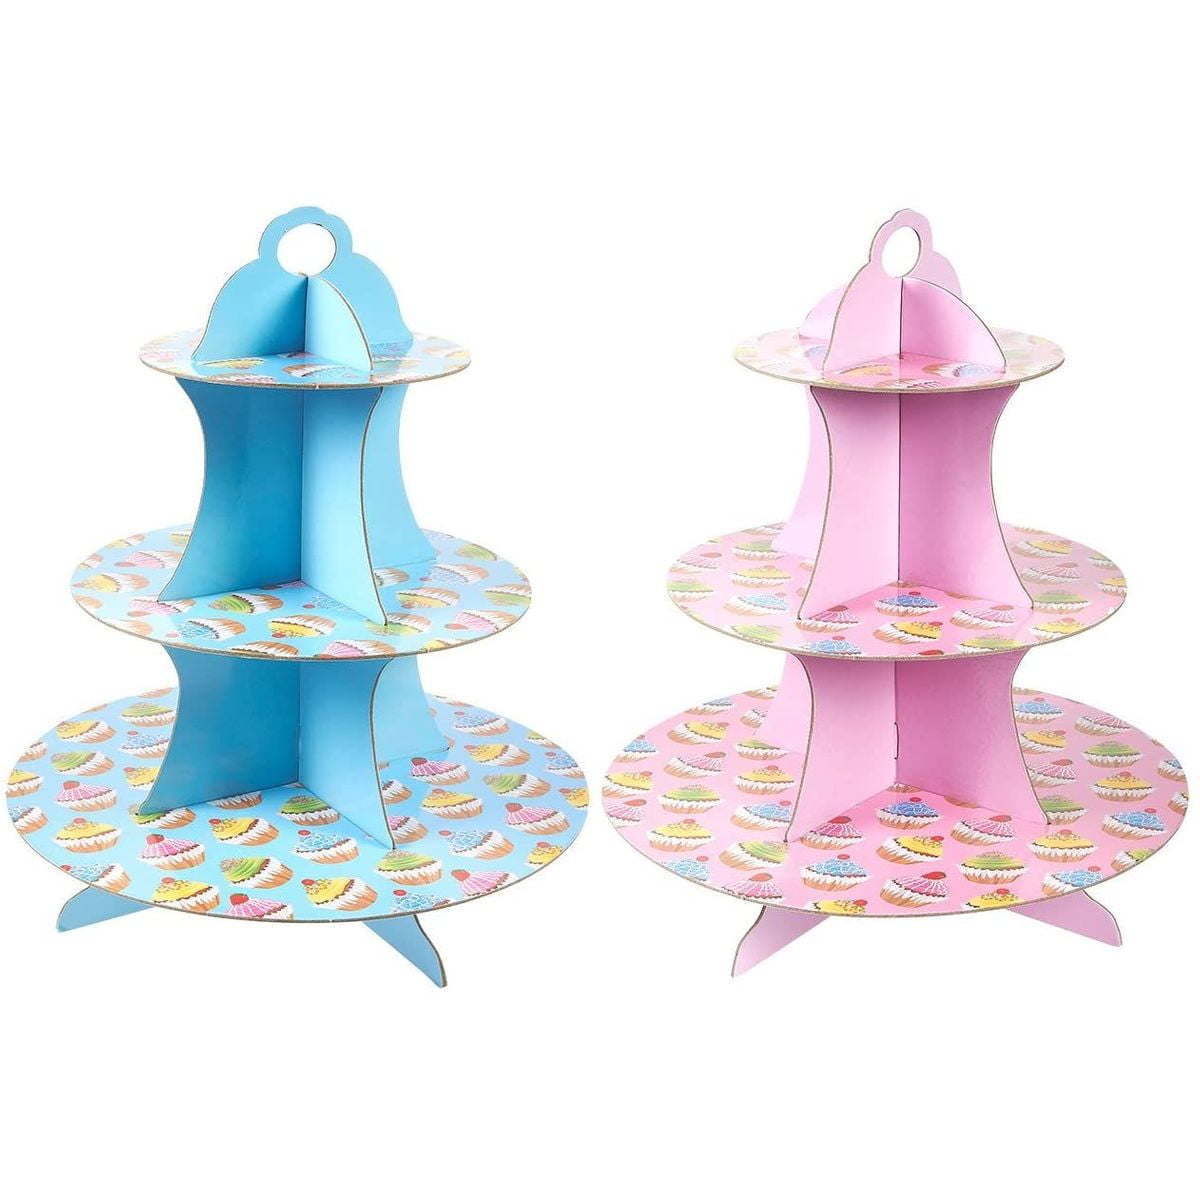 2 pc Pink and Blue Cupcake Stands Gender Reveal Baby Shower Dessert Tower BULK 